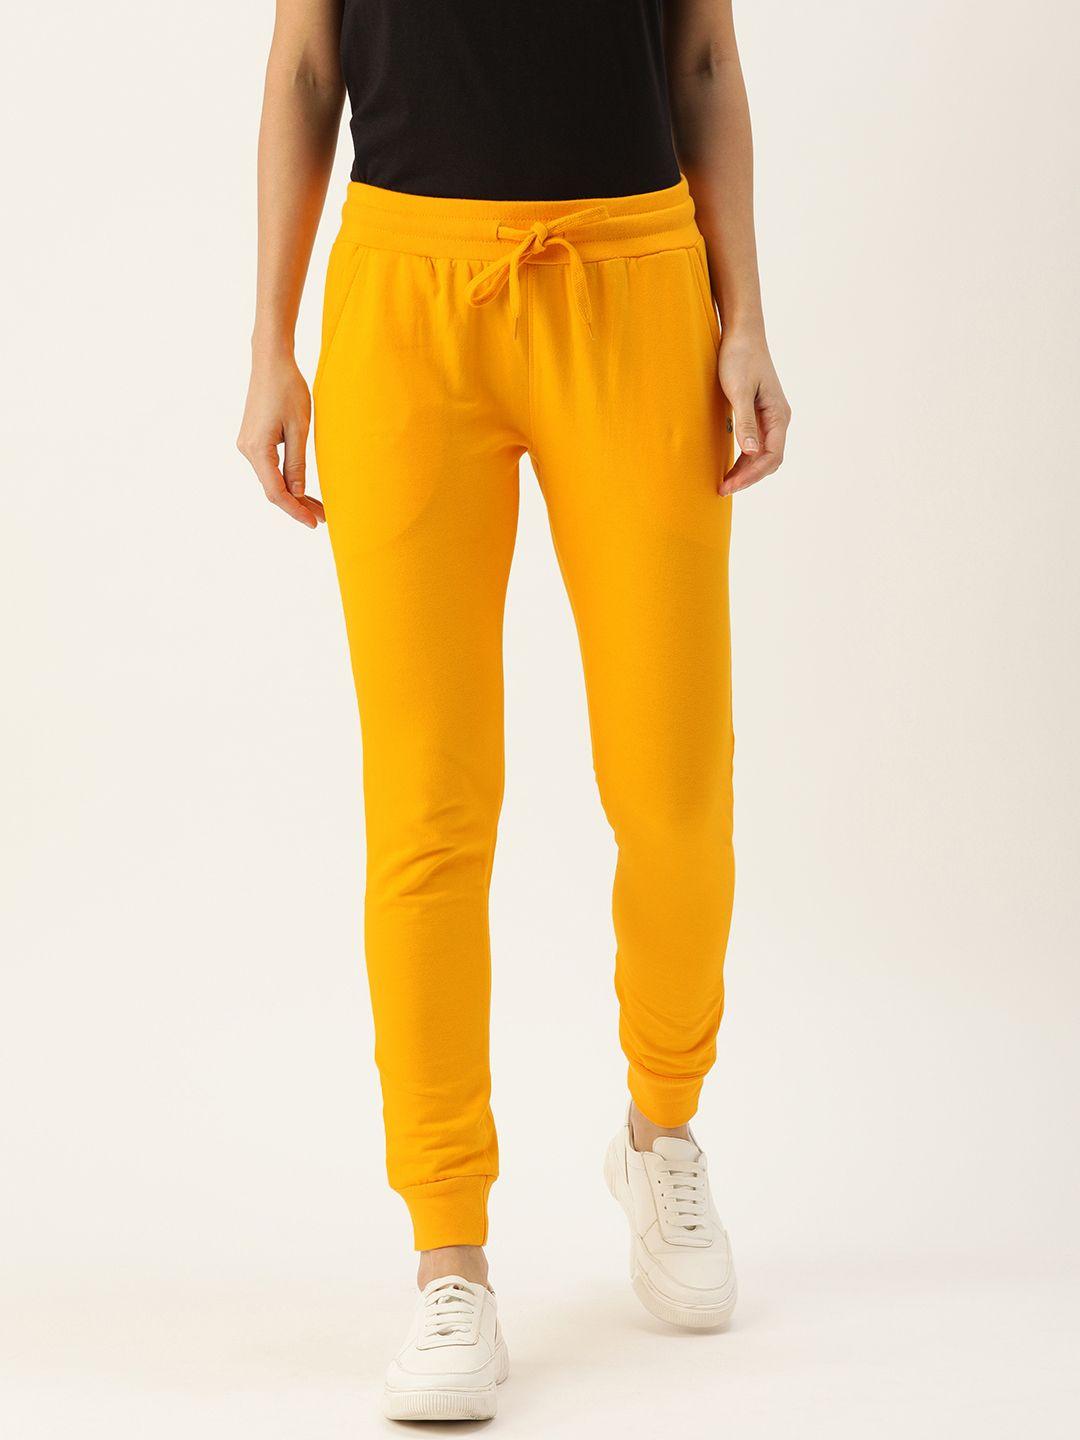 genius18-women-yellow-solid-classic-fit-training-joggers